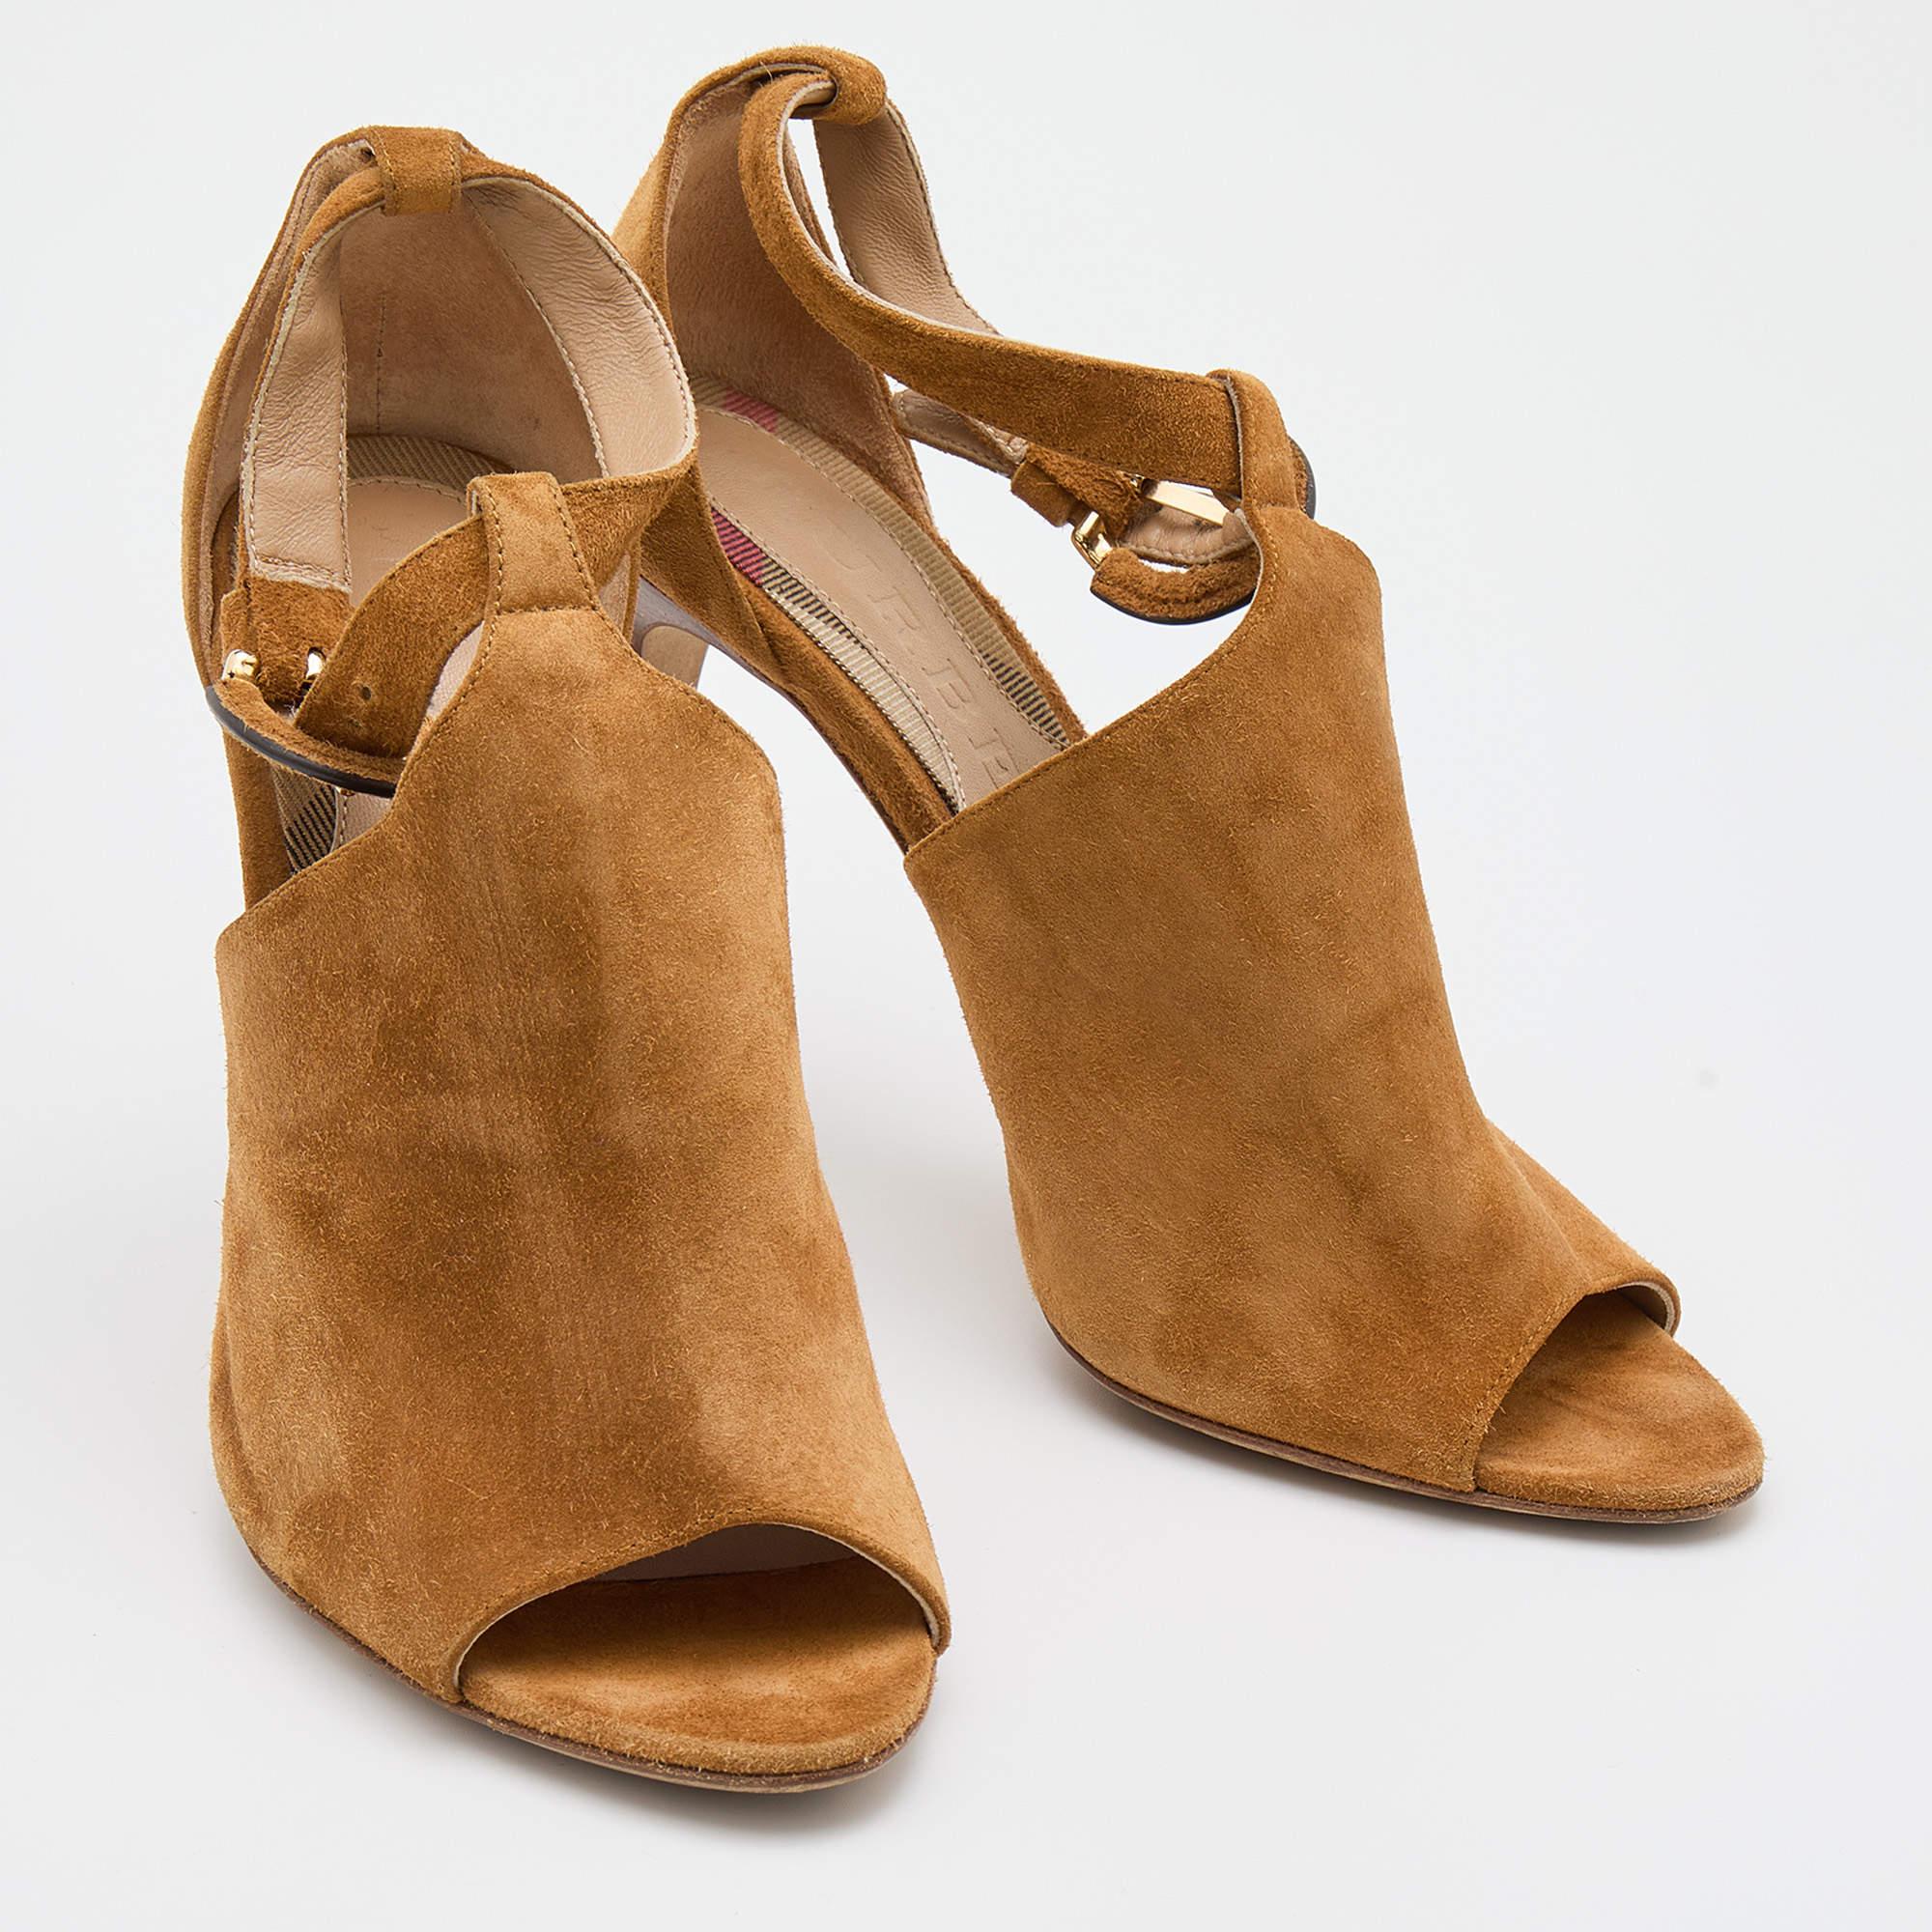 Burberry Brown Suede Ankle Strap Sandals Size 37.5 In Good Condition For Sale In Dubai, Al Qouz 2